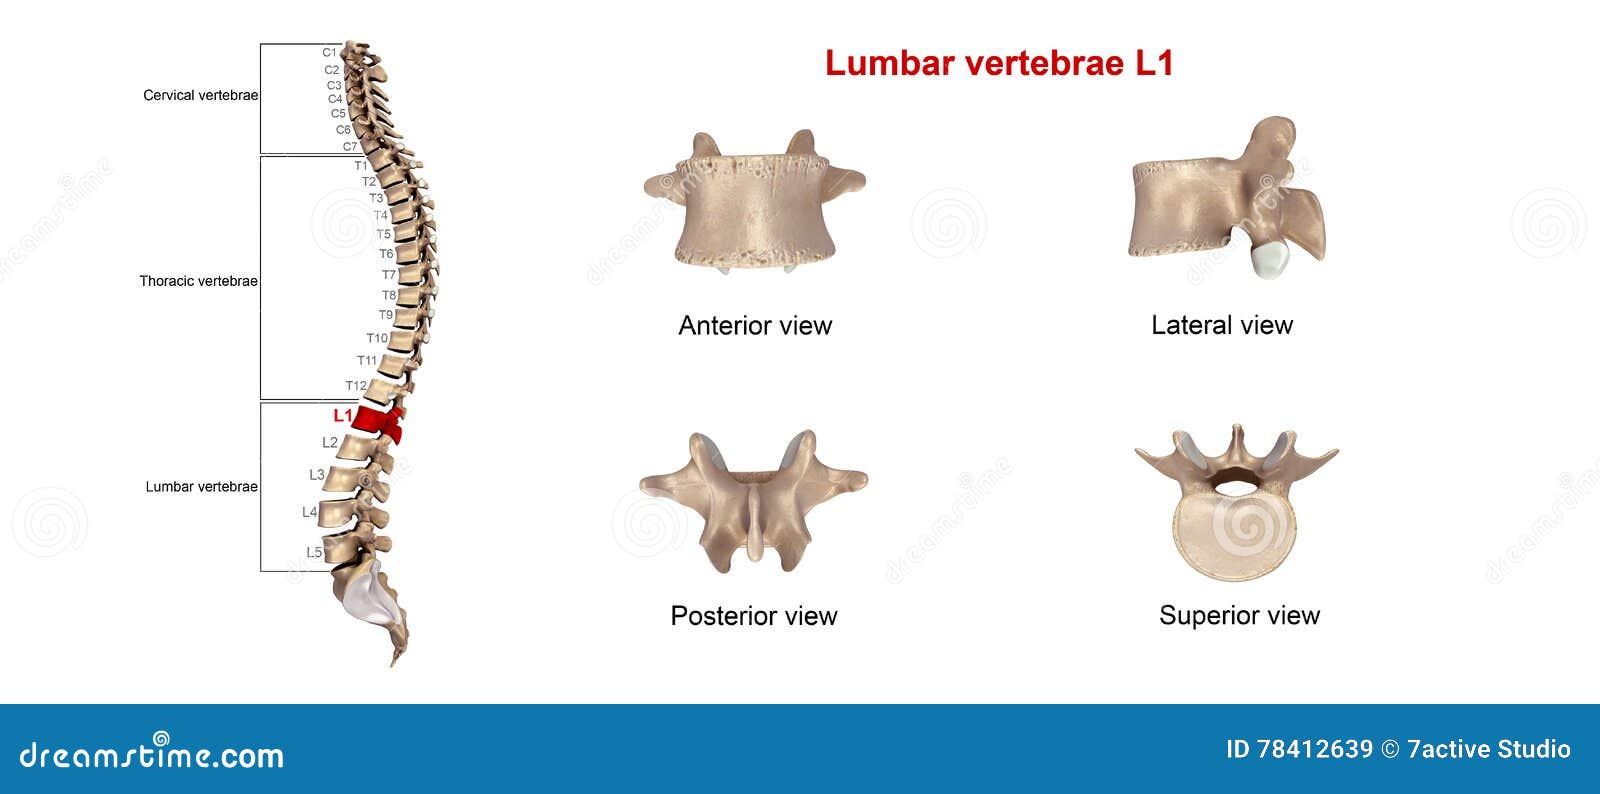 Compression Fracture of L1 - Trial Exhibits Inc.